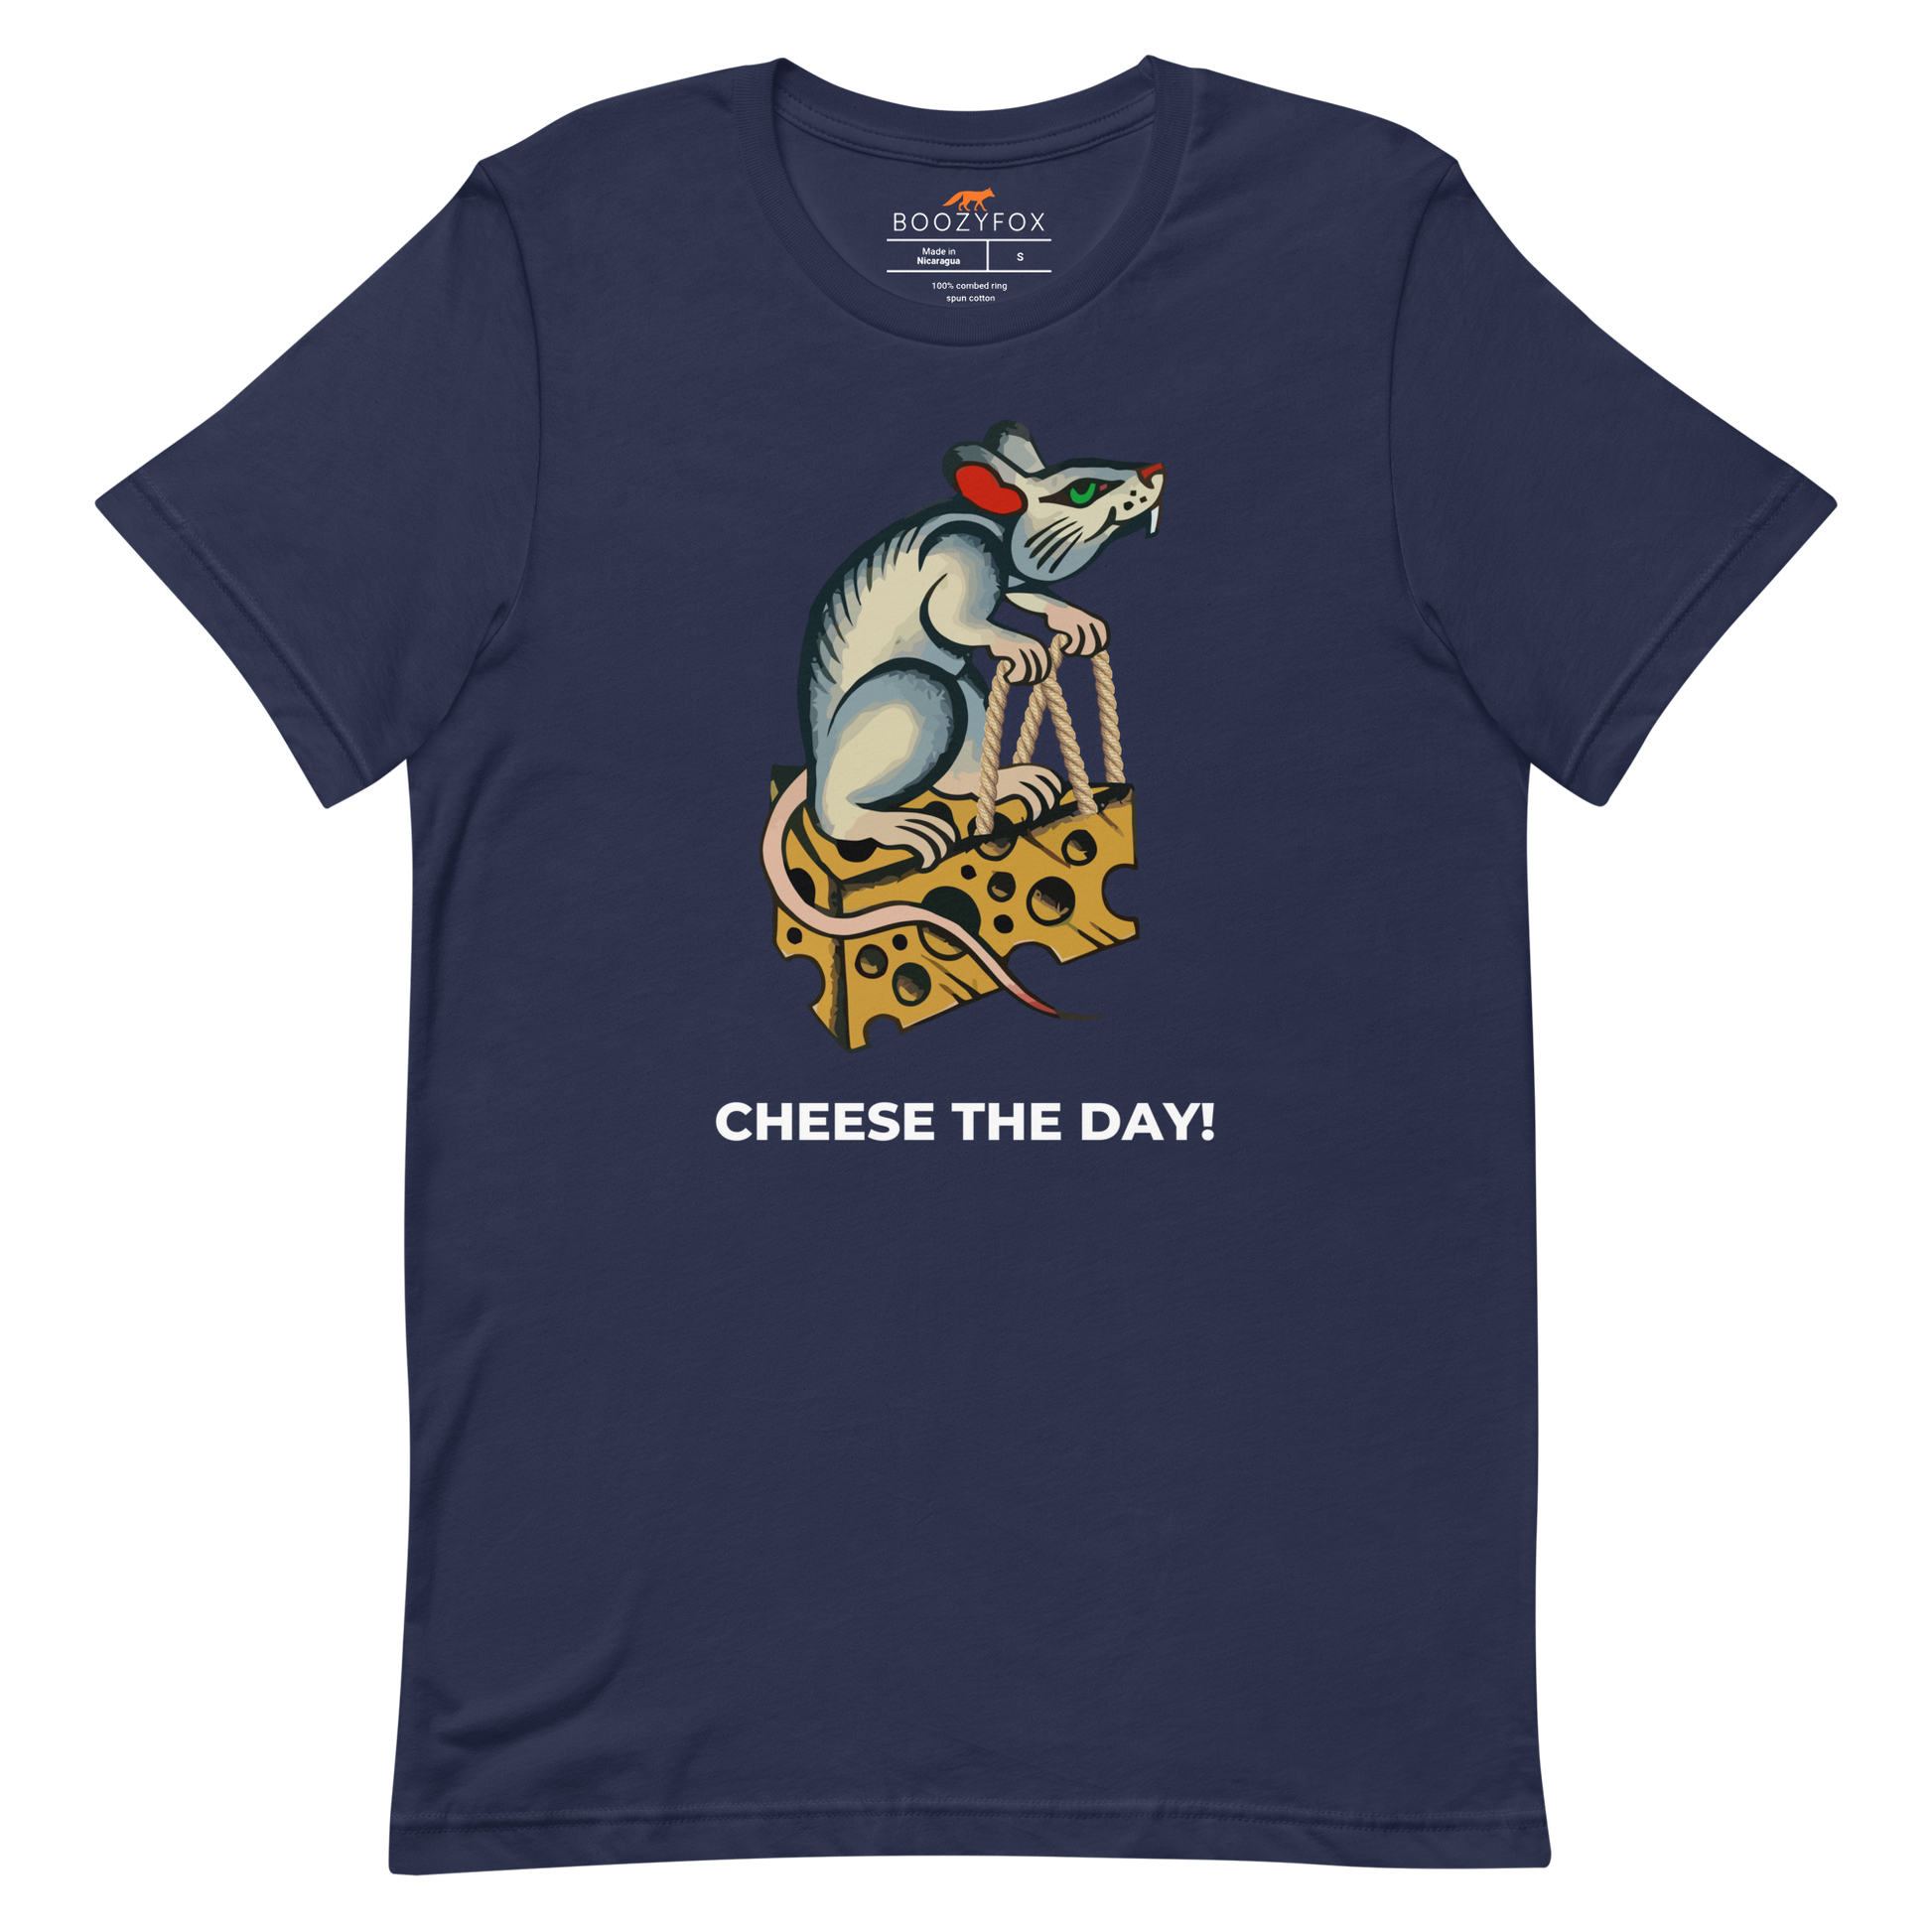 Navy Premium Rat T-Shirt featuring a hilarious Cheese The Day graphic on the chest - Funny Graphic Rat Tees - Boozy Fox